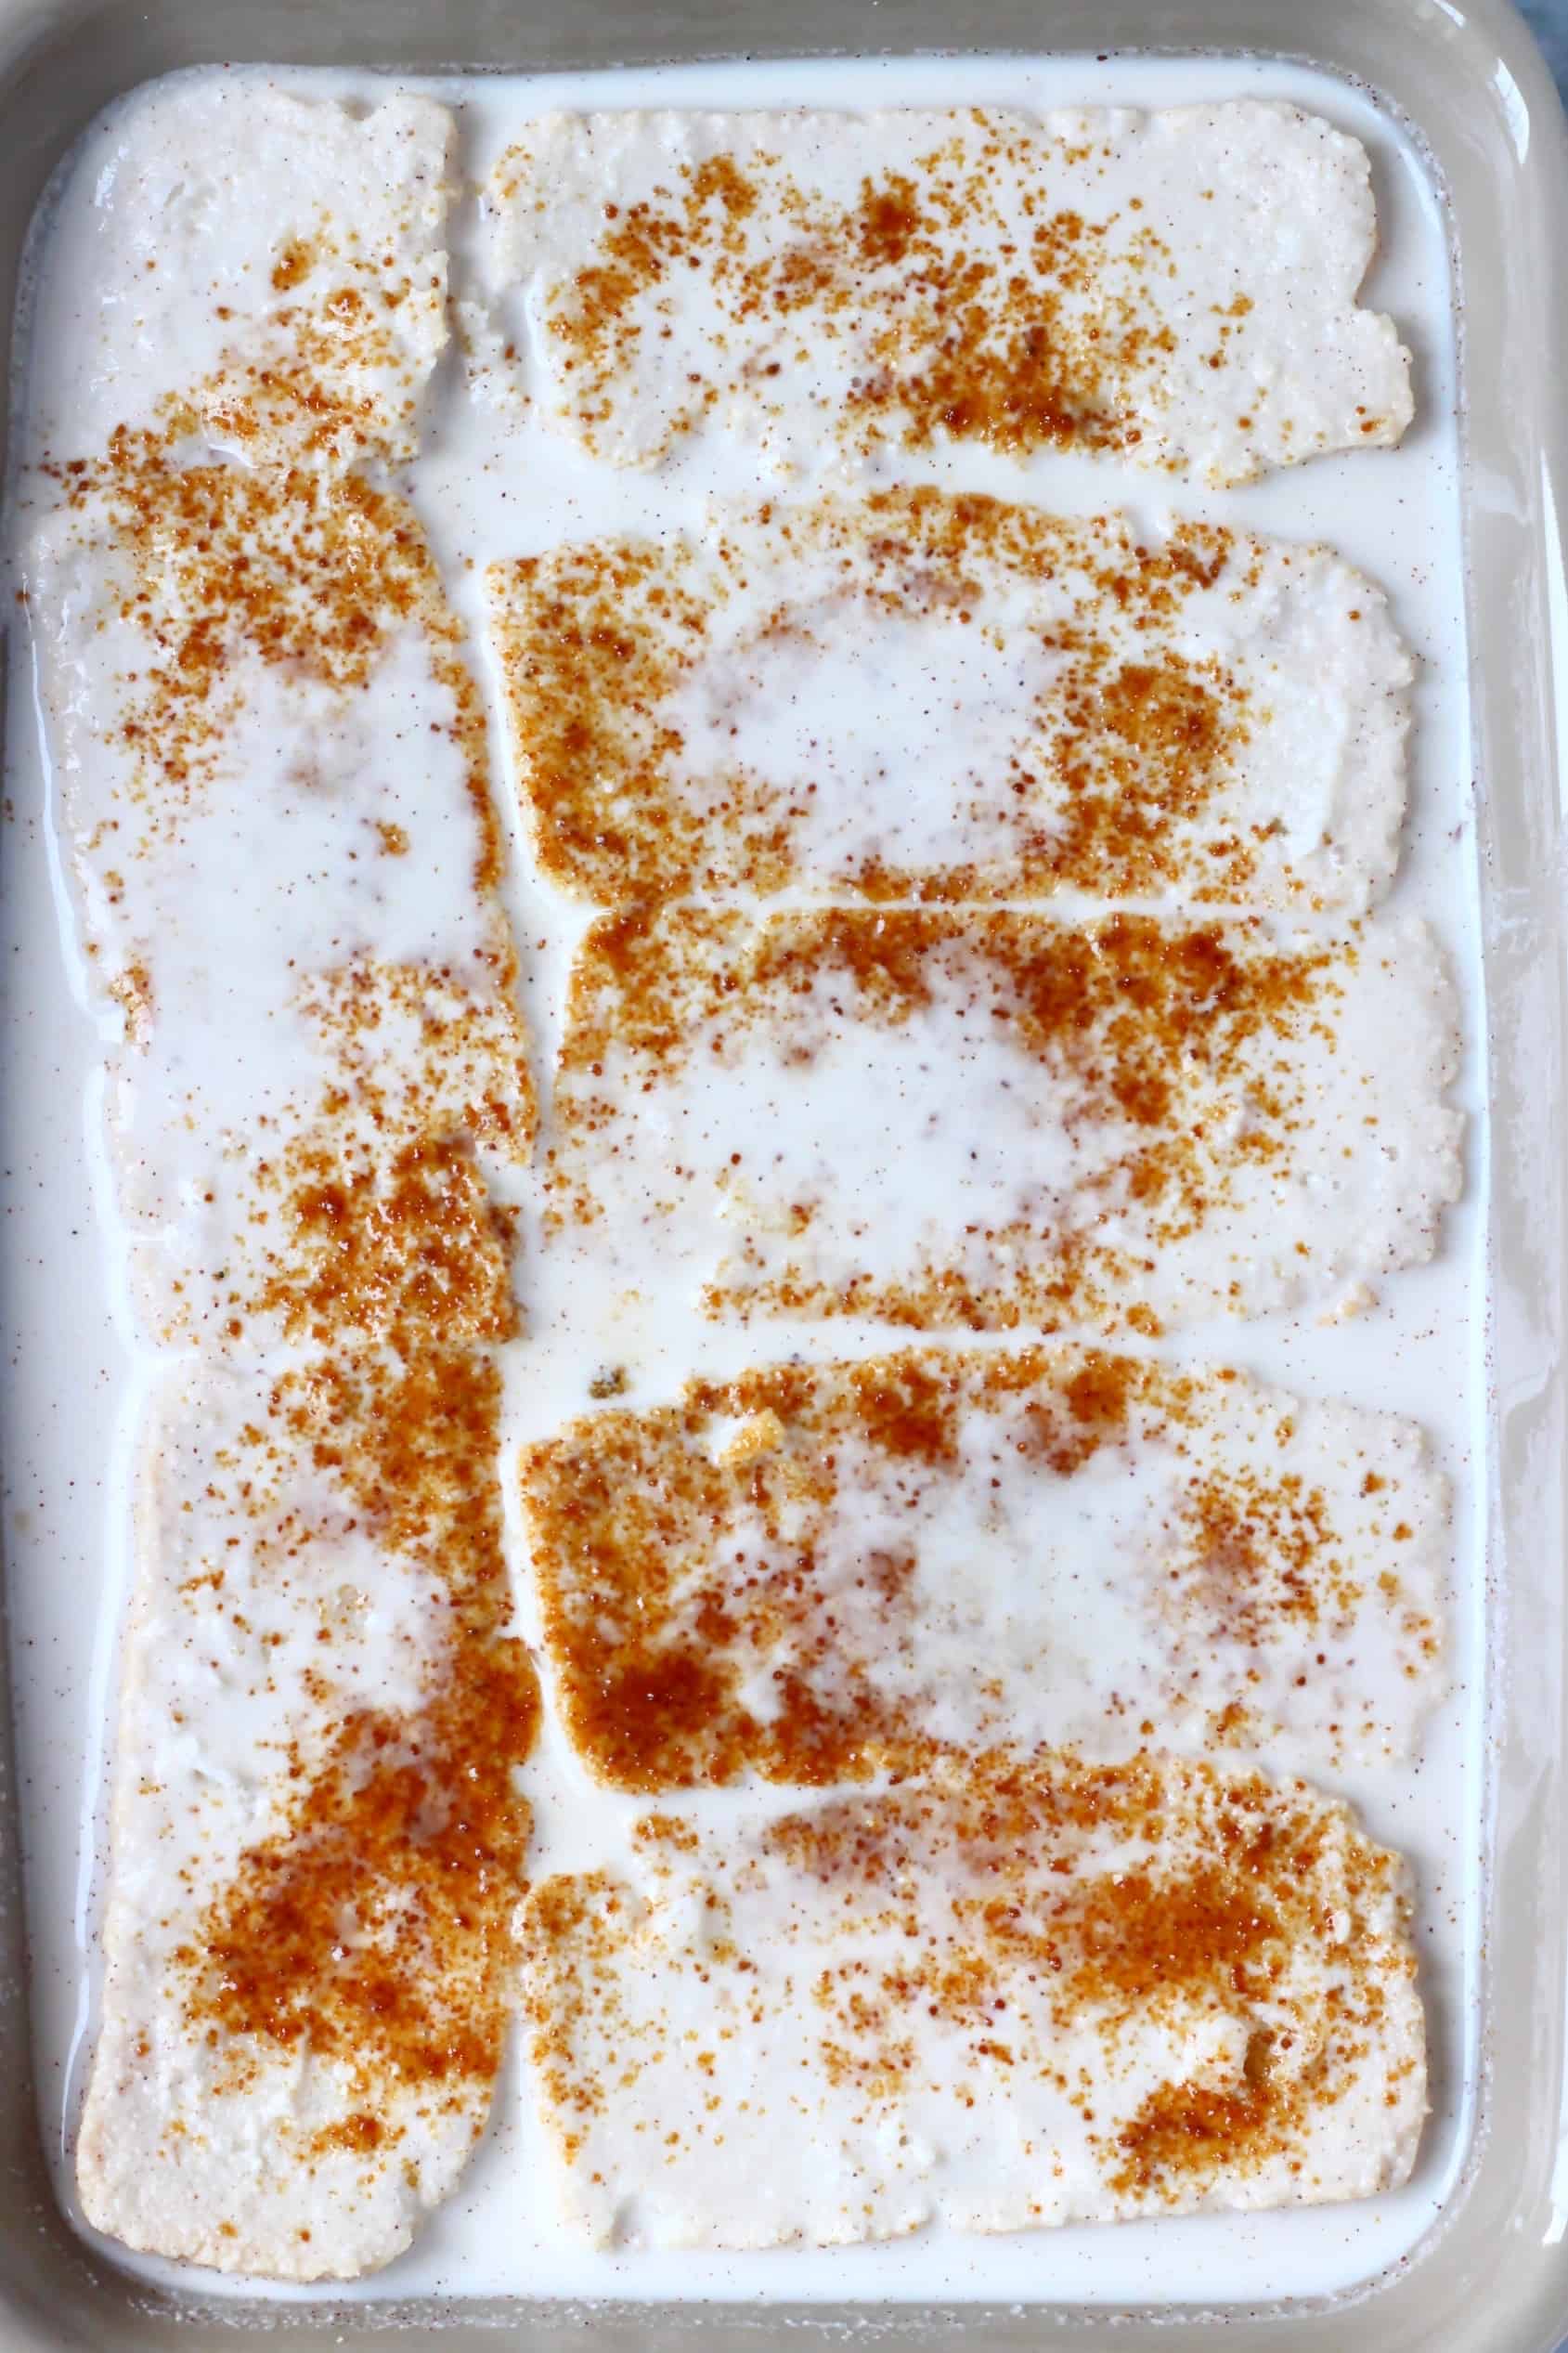 Slices of bread in a grey rectangular baking dish covered in white cream and sprinkled with brown coconut sugar